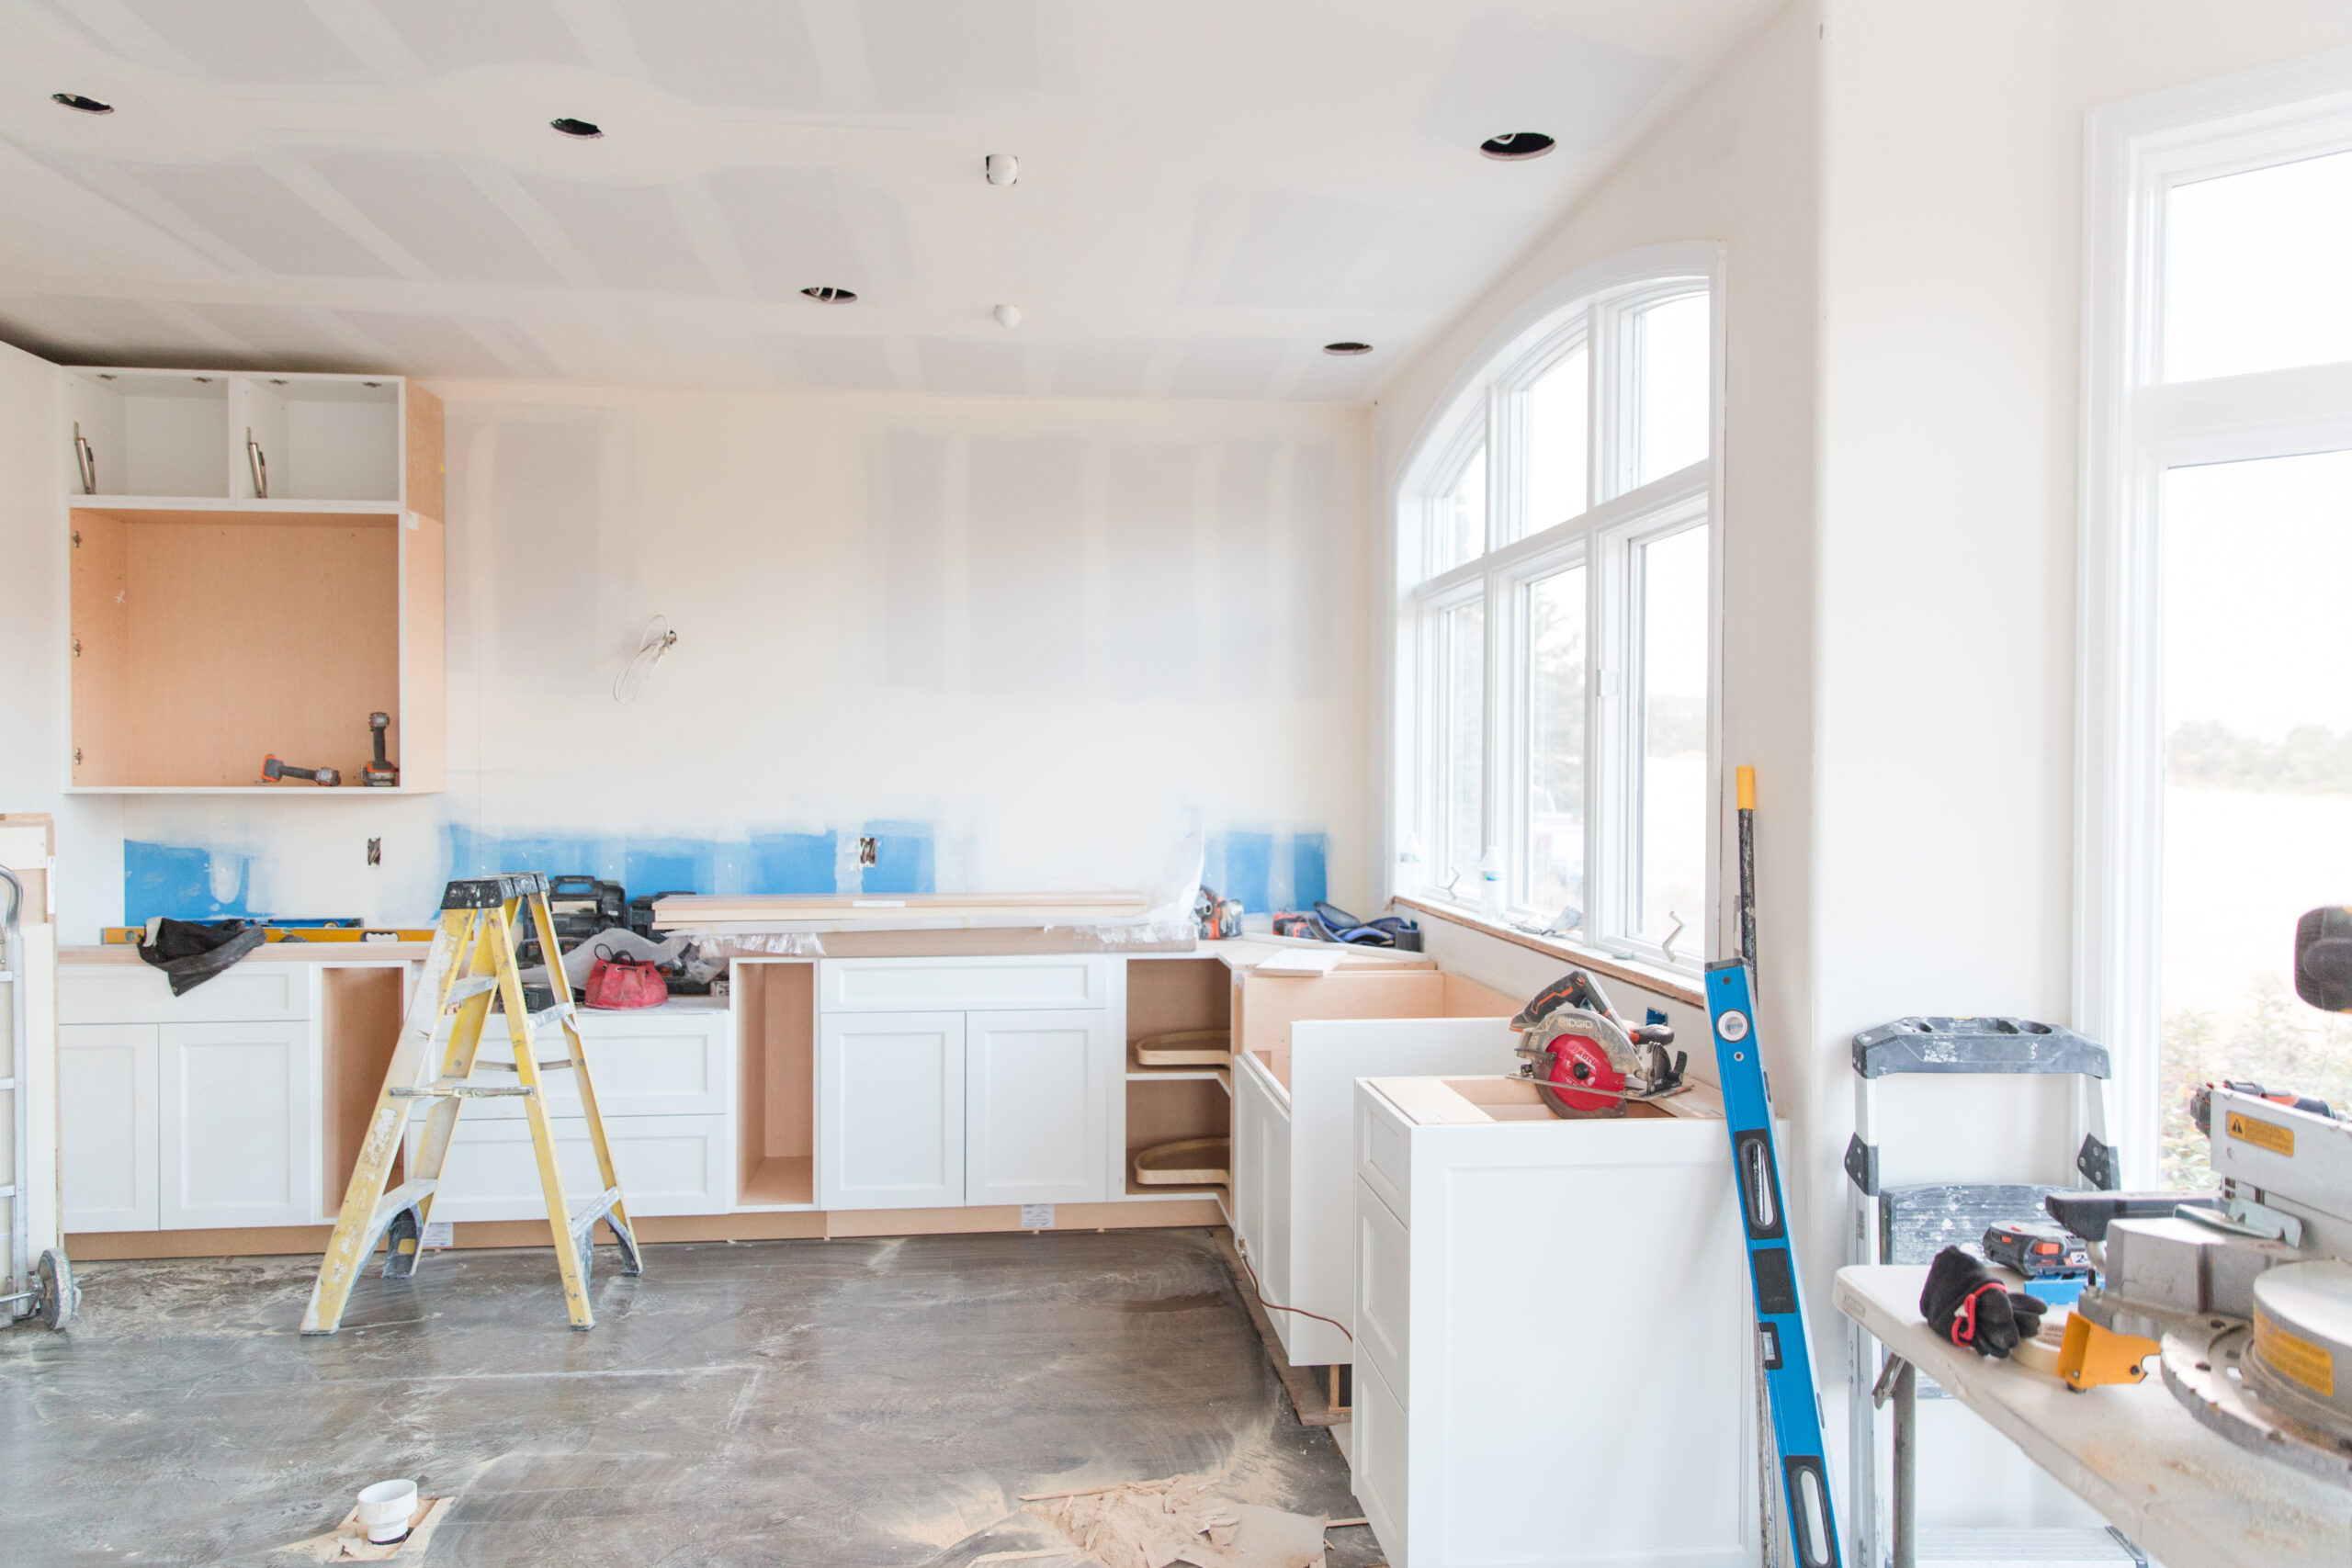 In a semi-remodeled kitchen, the cabinetry is being installed. The ceilings and walls are primed for paint, and the floor remains unfinished.